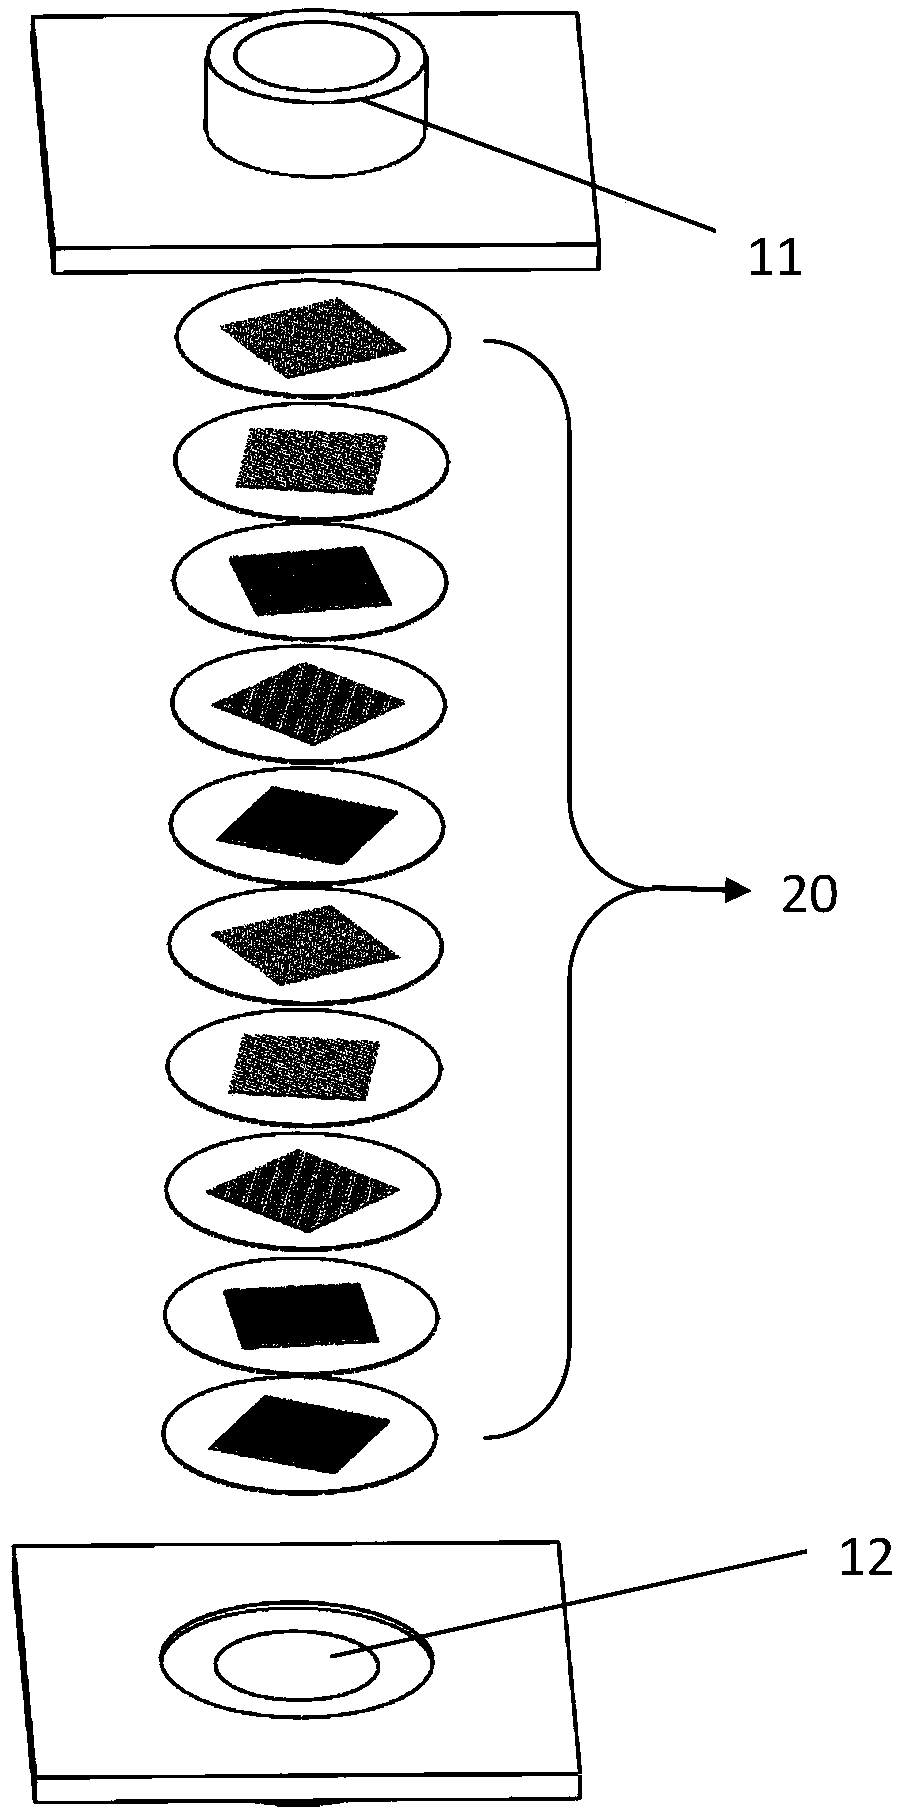 Method for enriching and screening a target substance, such as cells, from sample